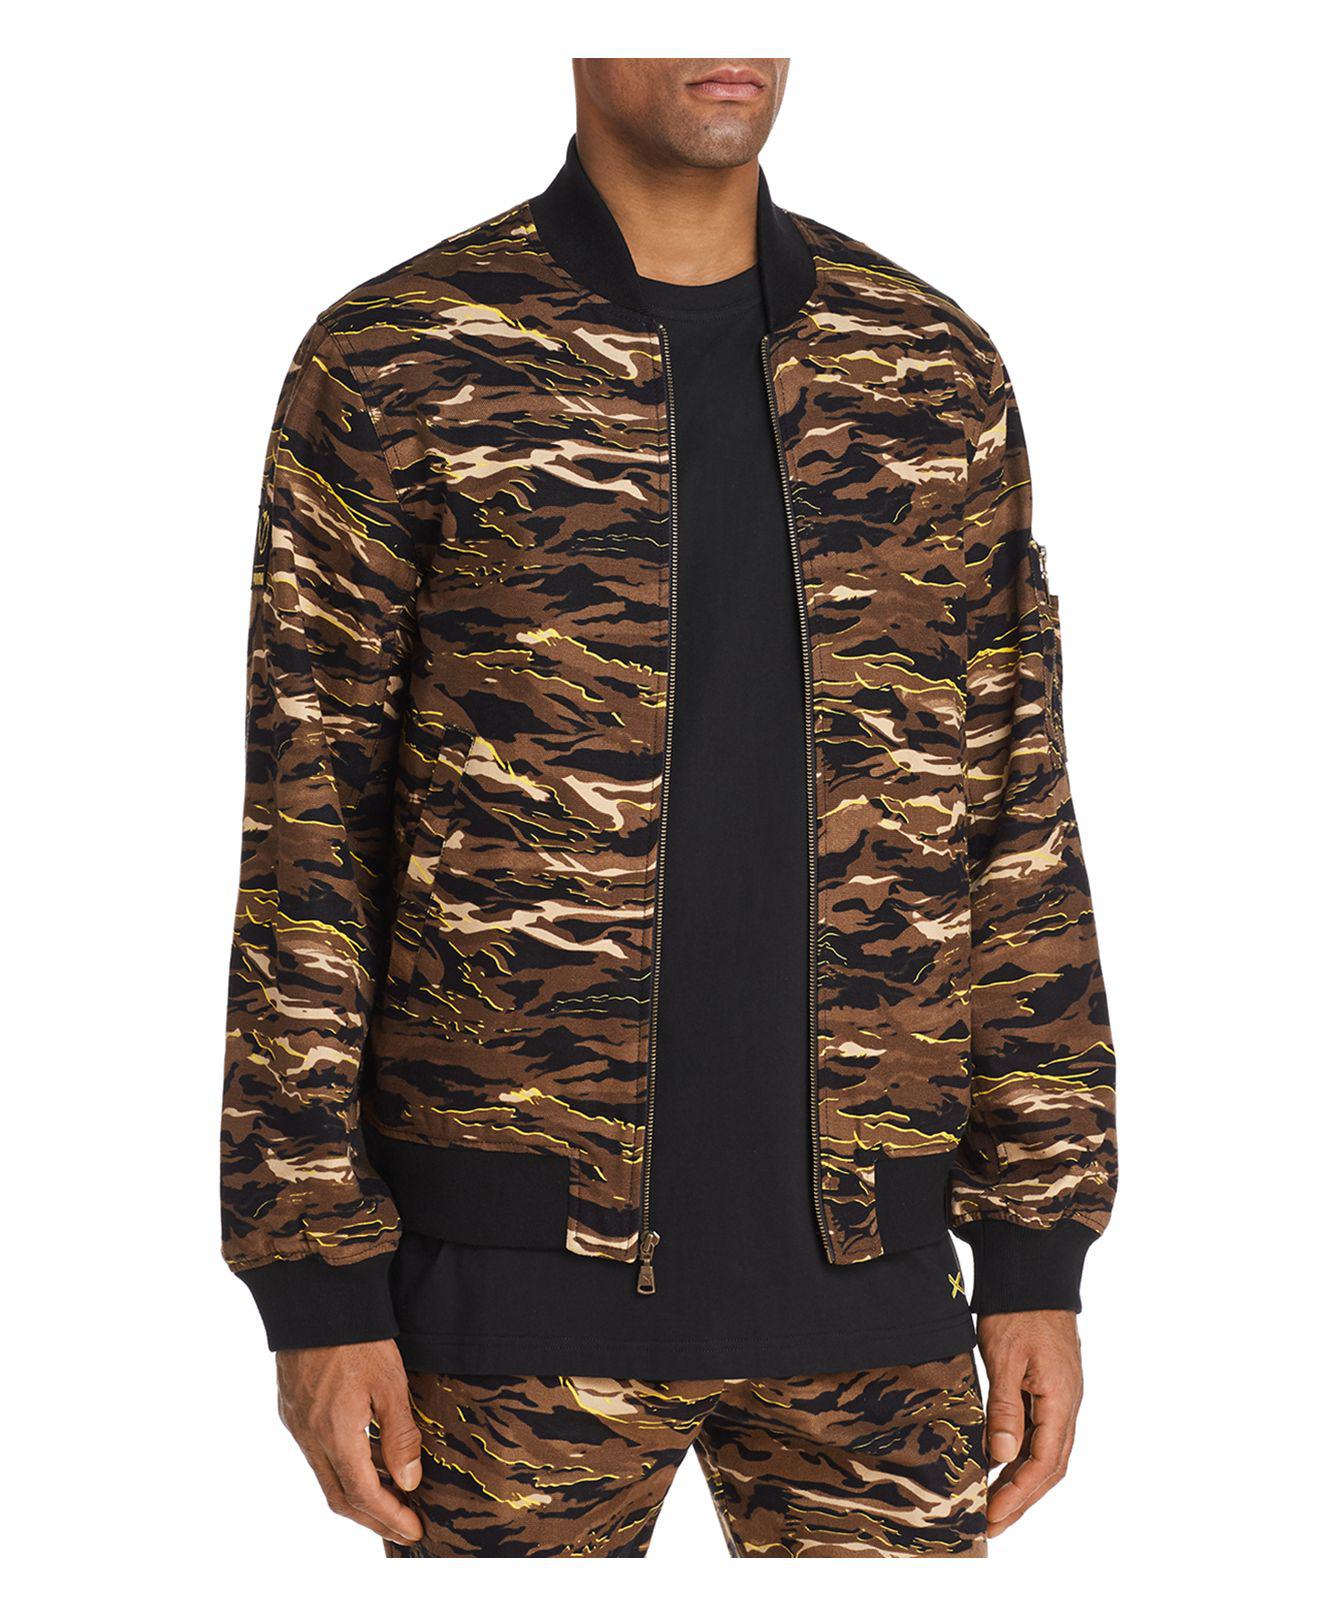 PUMA X Xo The Weeknd Camouflage Bomber Jacket for Men | Lyst